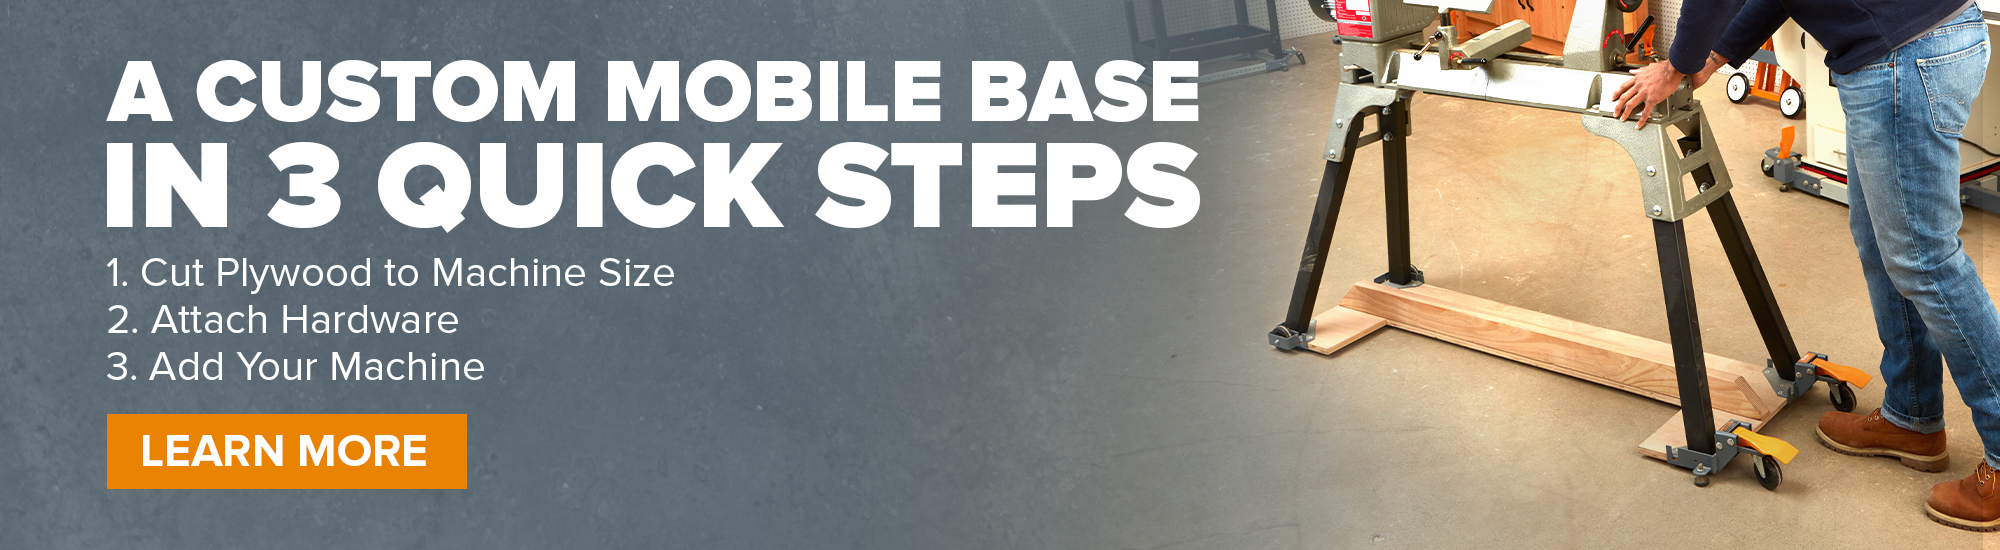 Get a Custom Mobile Base in 3 Quick Steps using the PM-1100 Mobile Base Kit. Click to learn more.